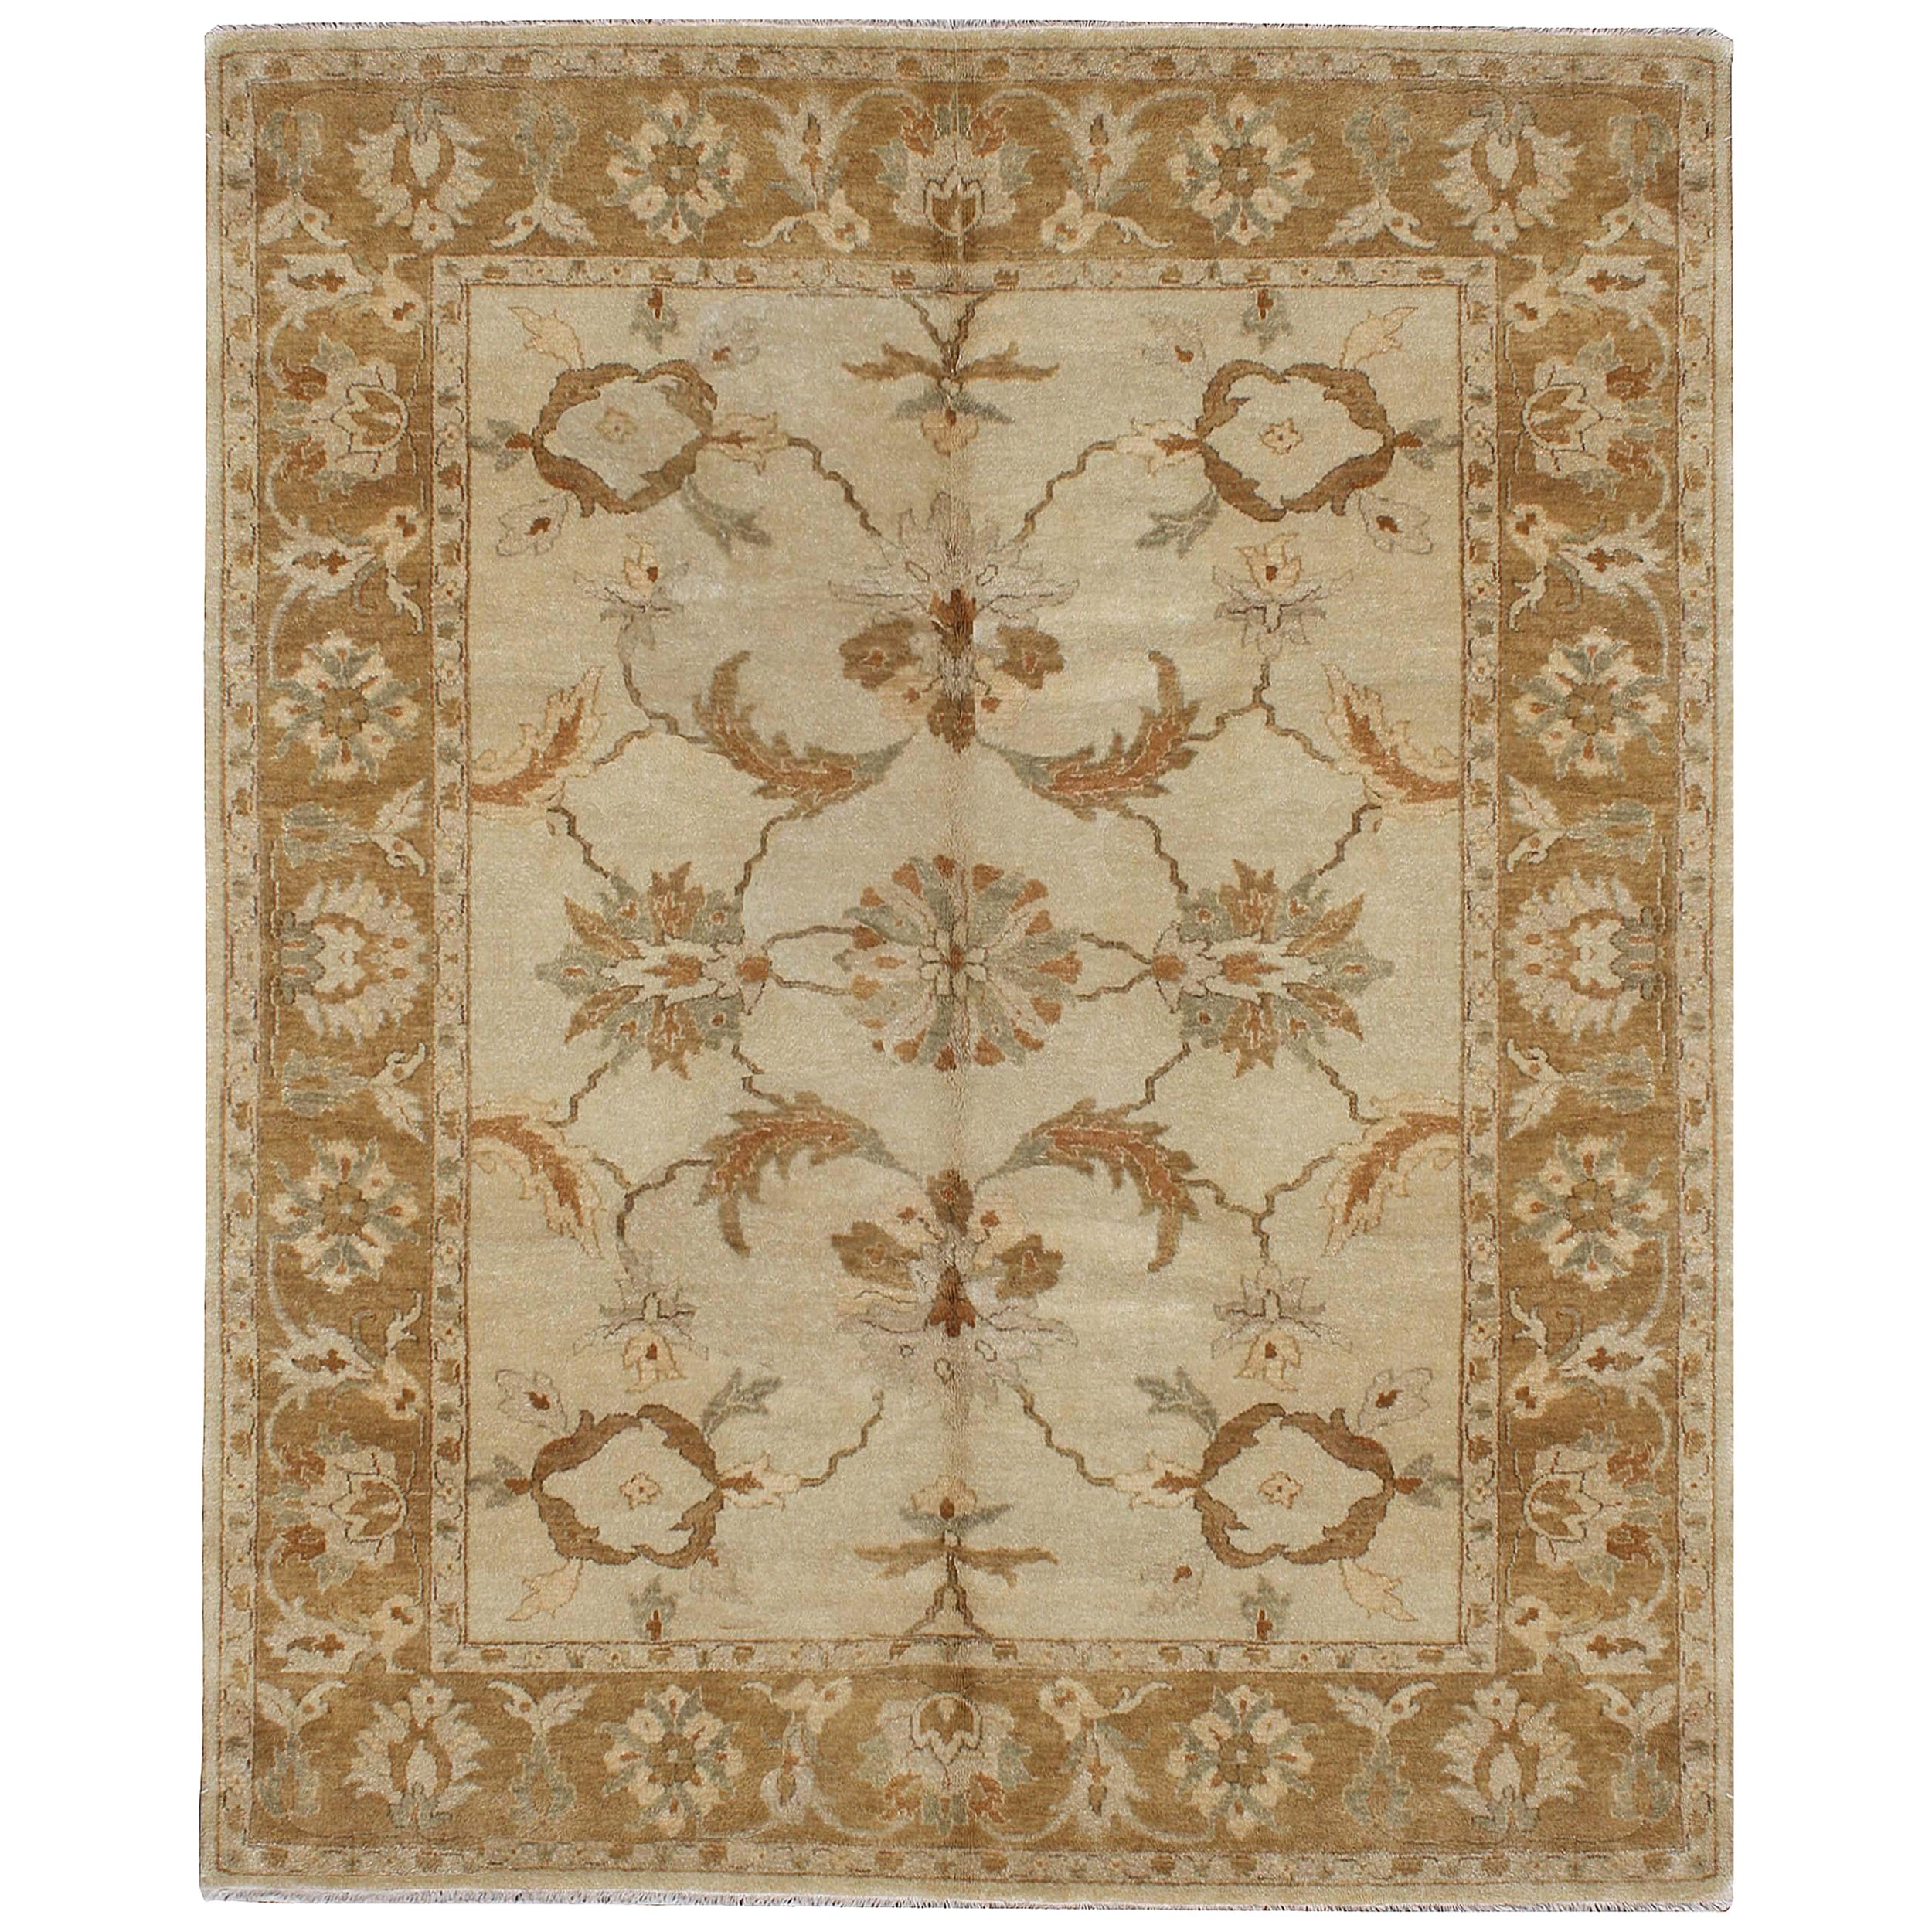 Luxury Traditional Hand-Knotted Agra Ivory & Camel 12x15 Rug